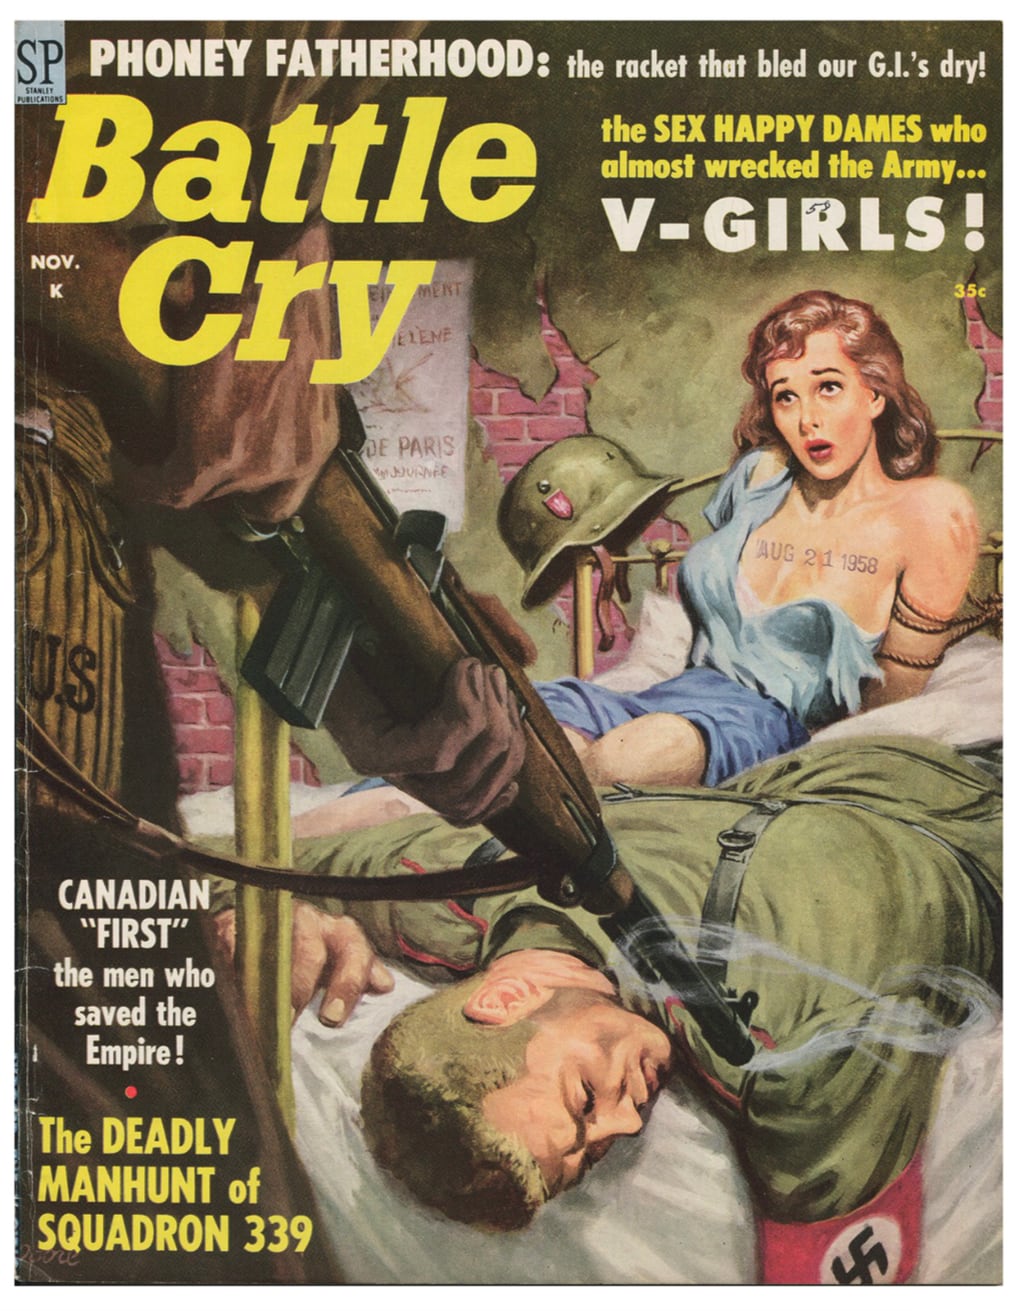 Wwii Porn - War, heroism and sex: Pulp magazines & the messages they perpetuated